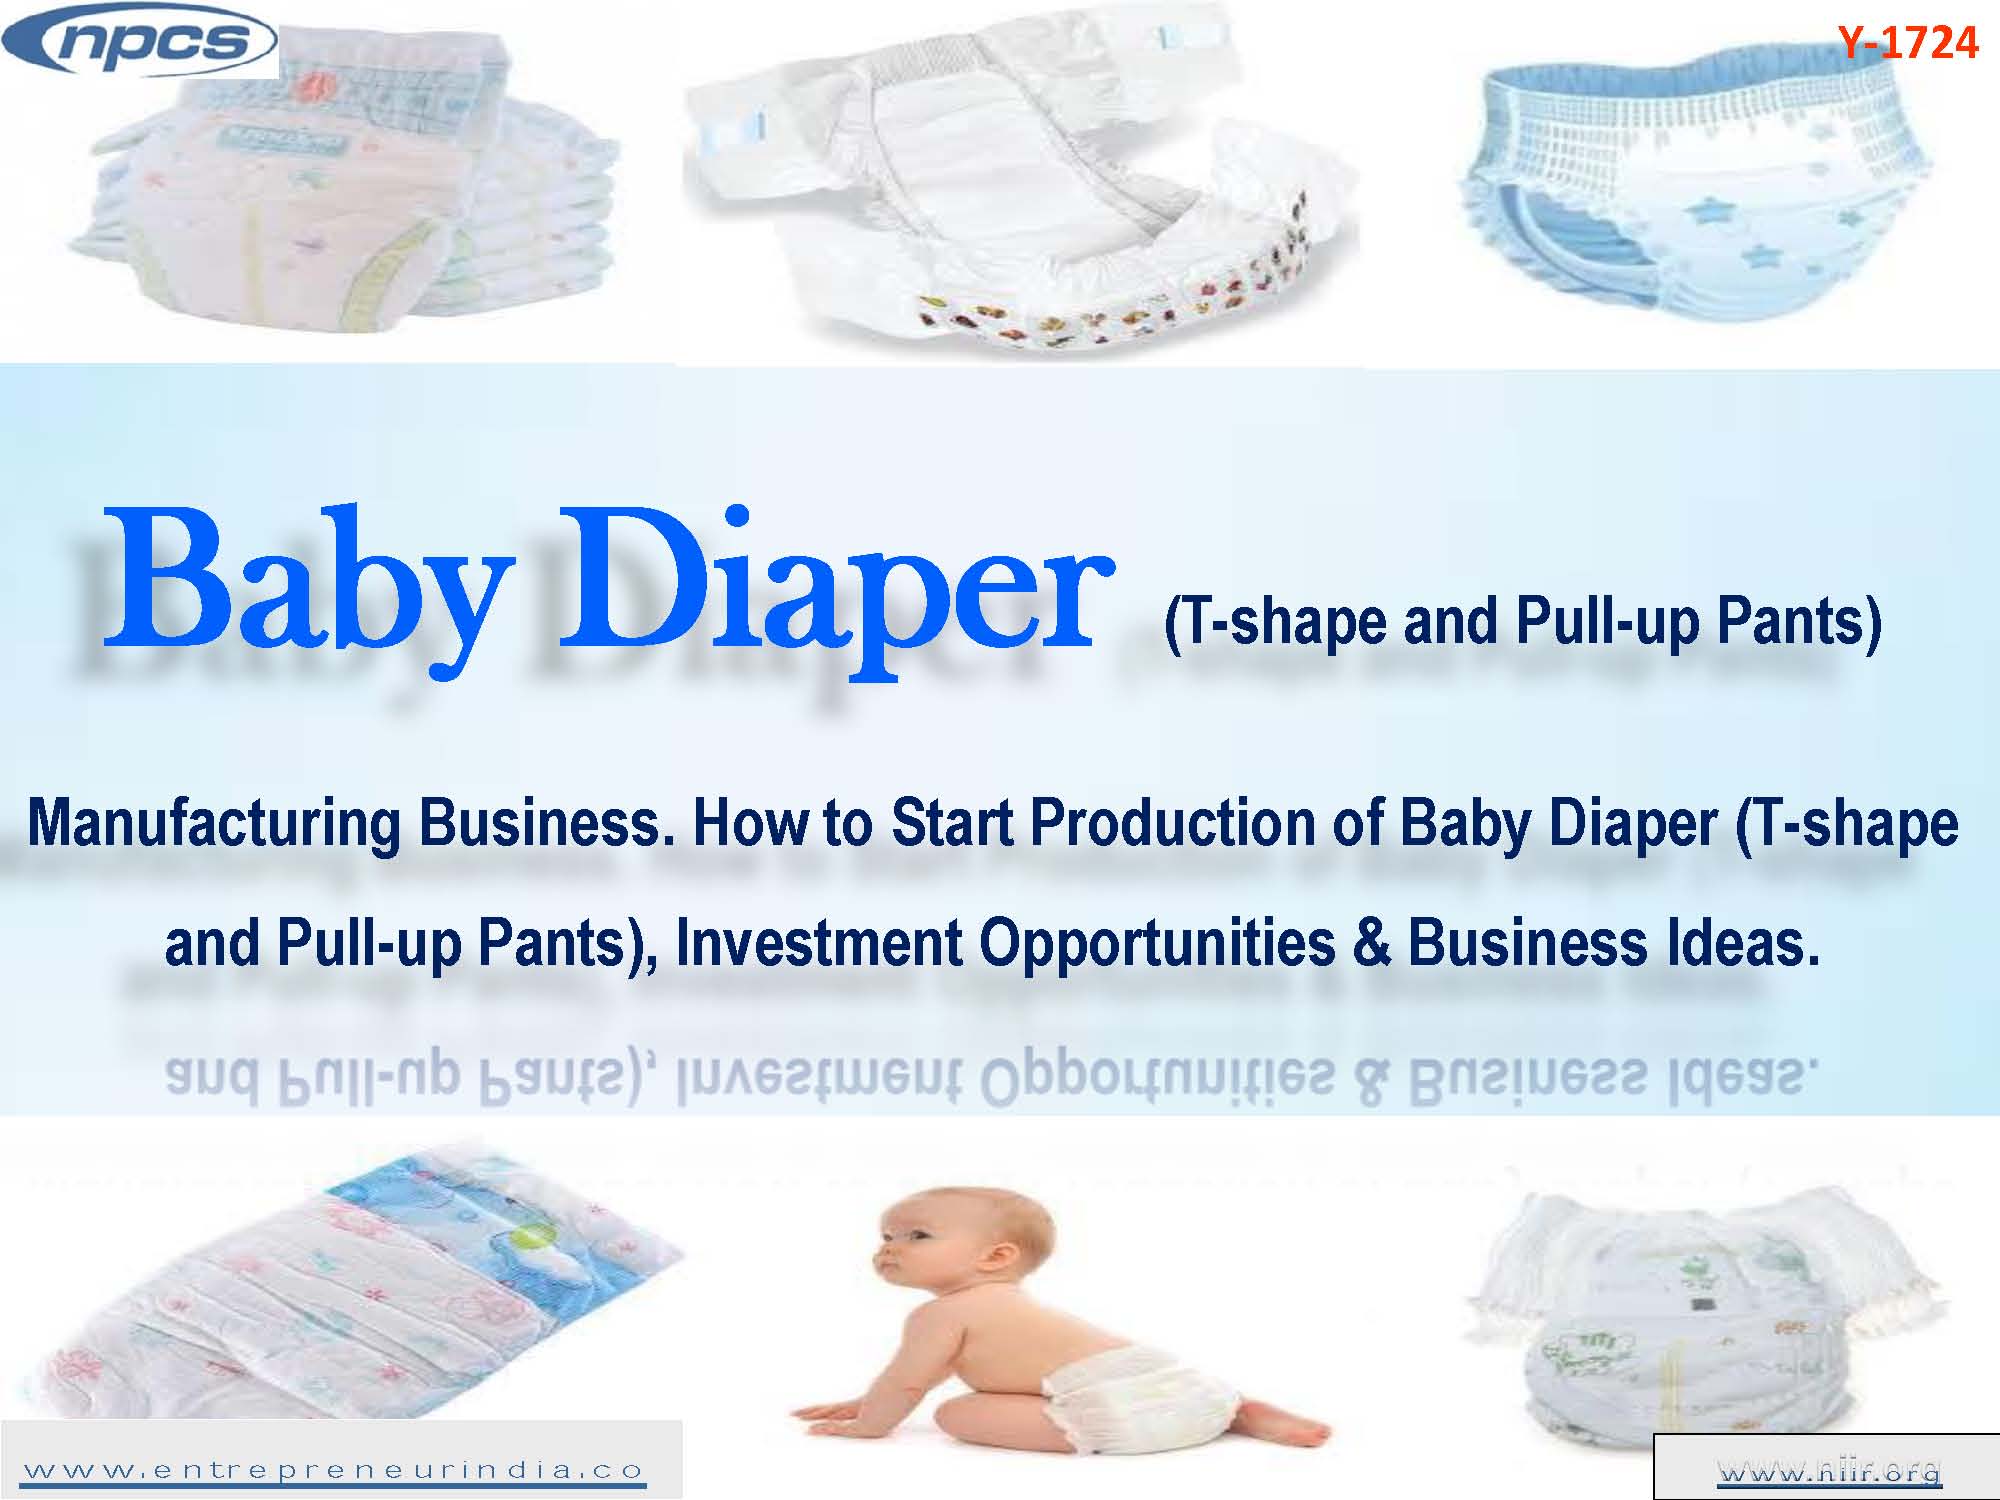 Baby Diaper T shape and Pull up Pants Manufacturing Business How to Start Production of Baby Diaper T shape and Pull up Pants, Investment Opportunities and Business Ideas